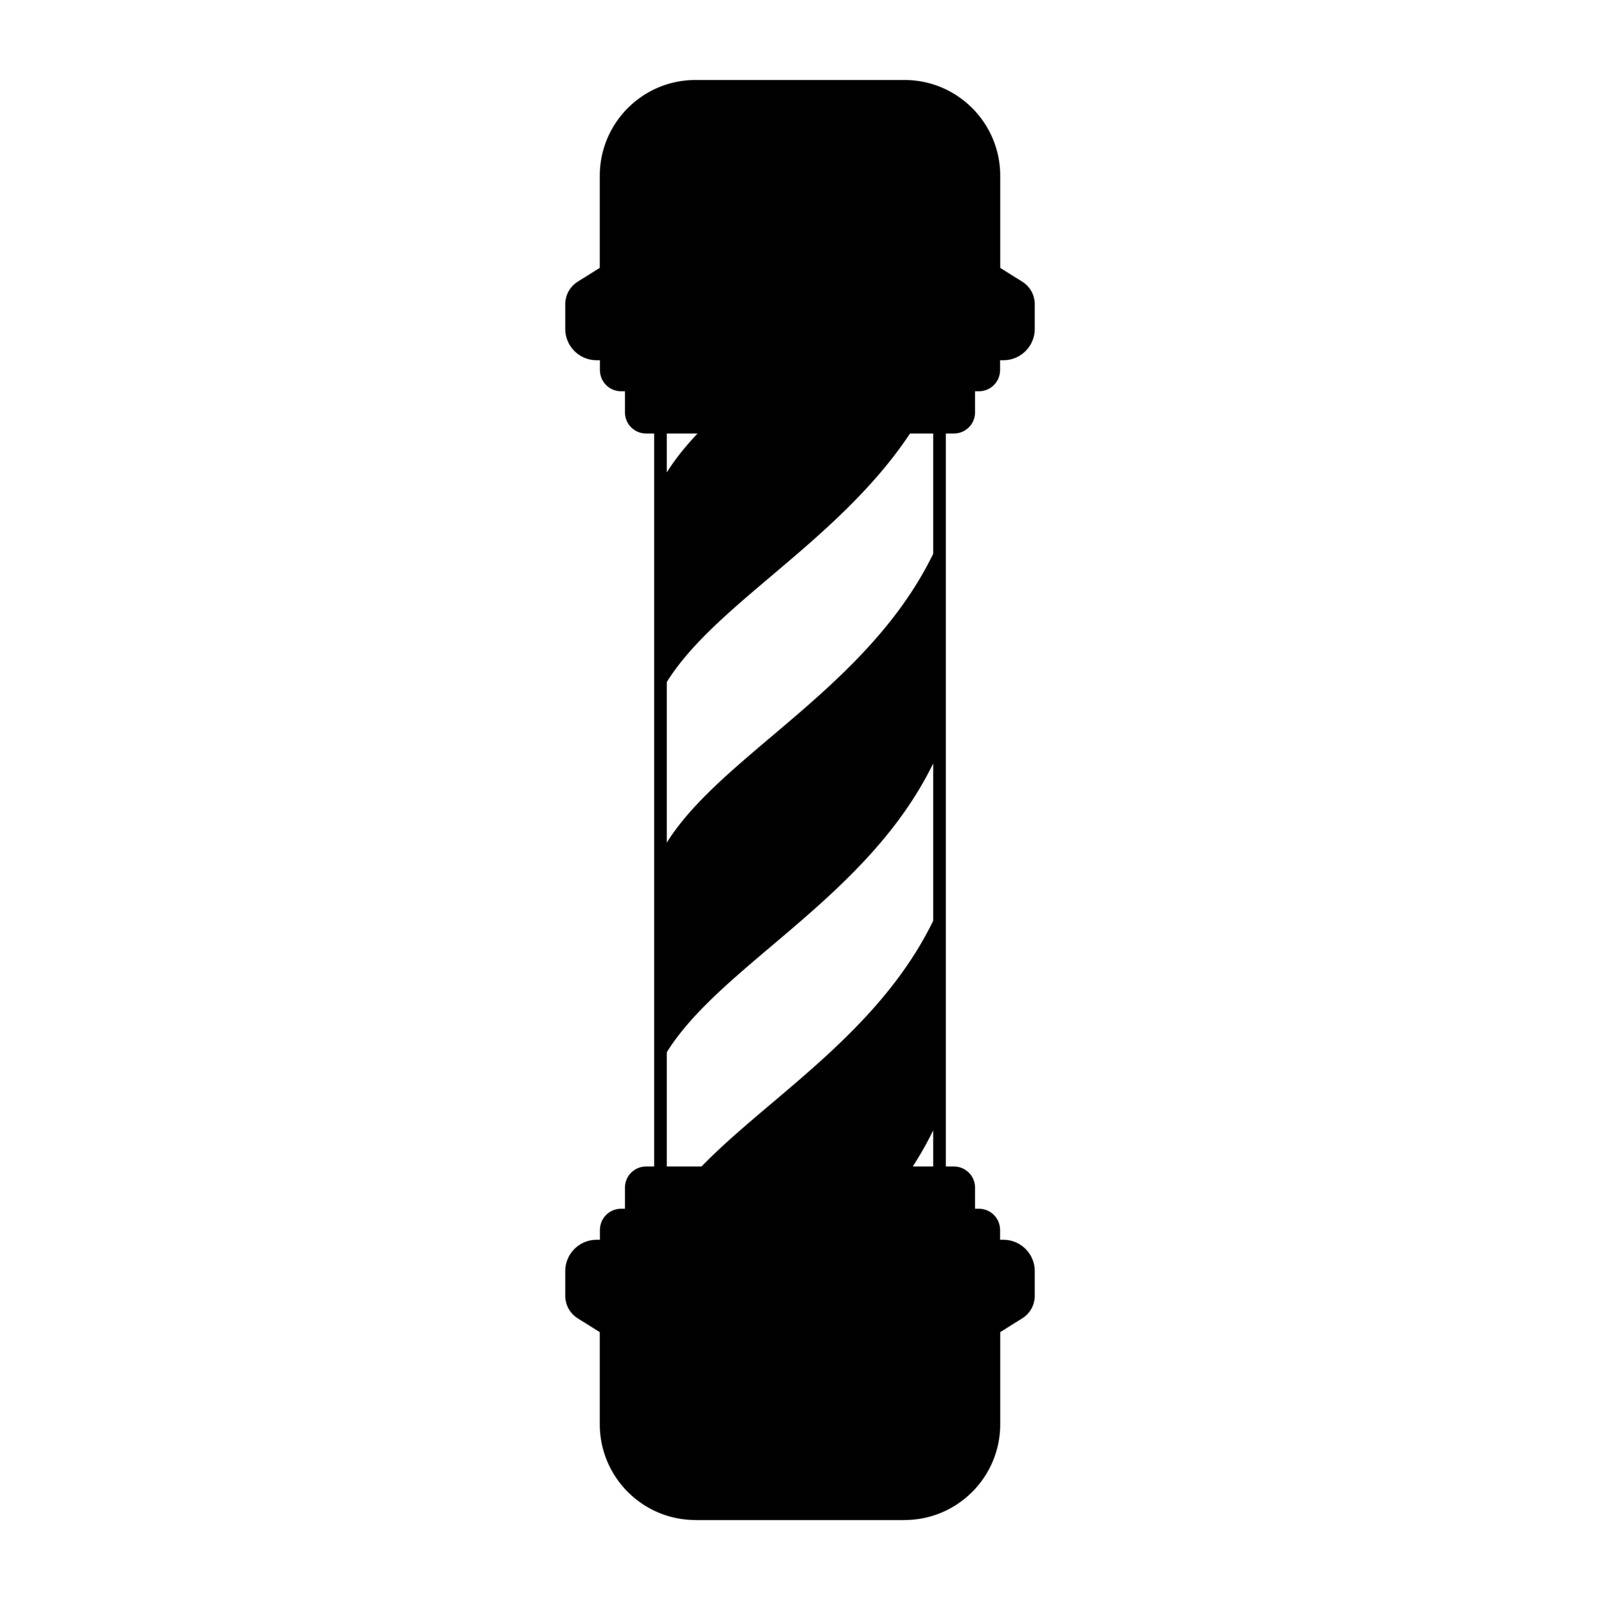 Barber shop pole icon black color illustration flat style simple image by serhii435